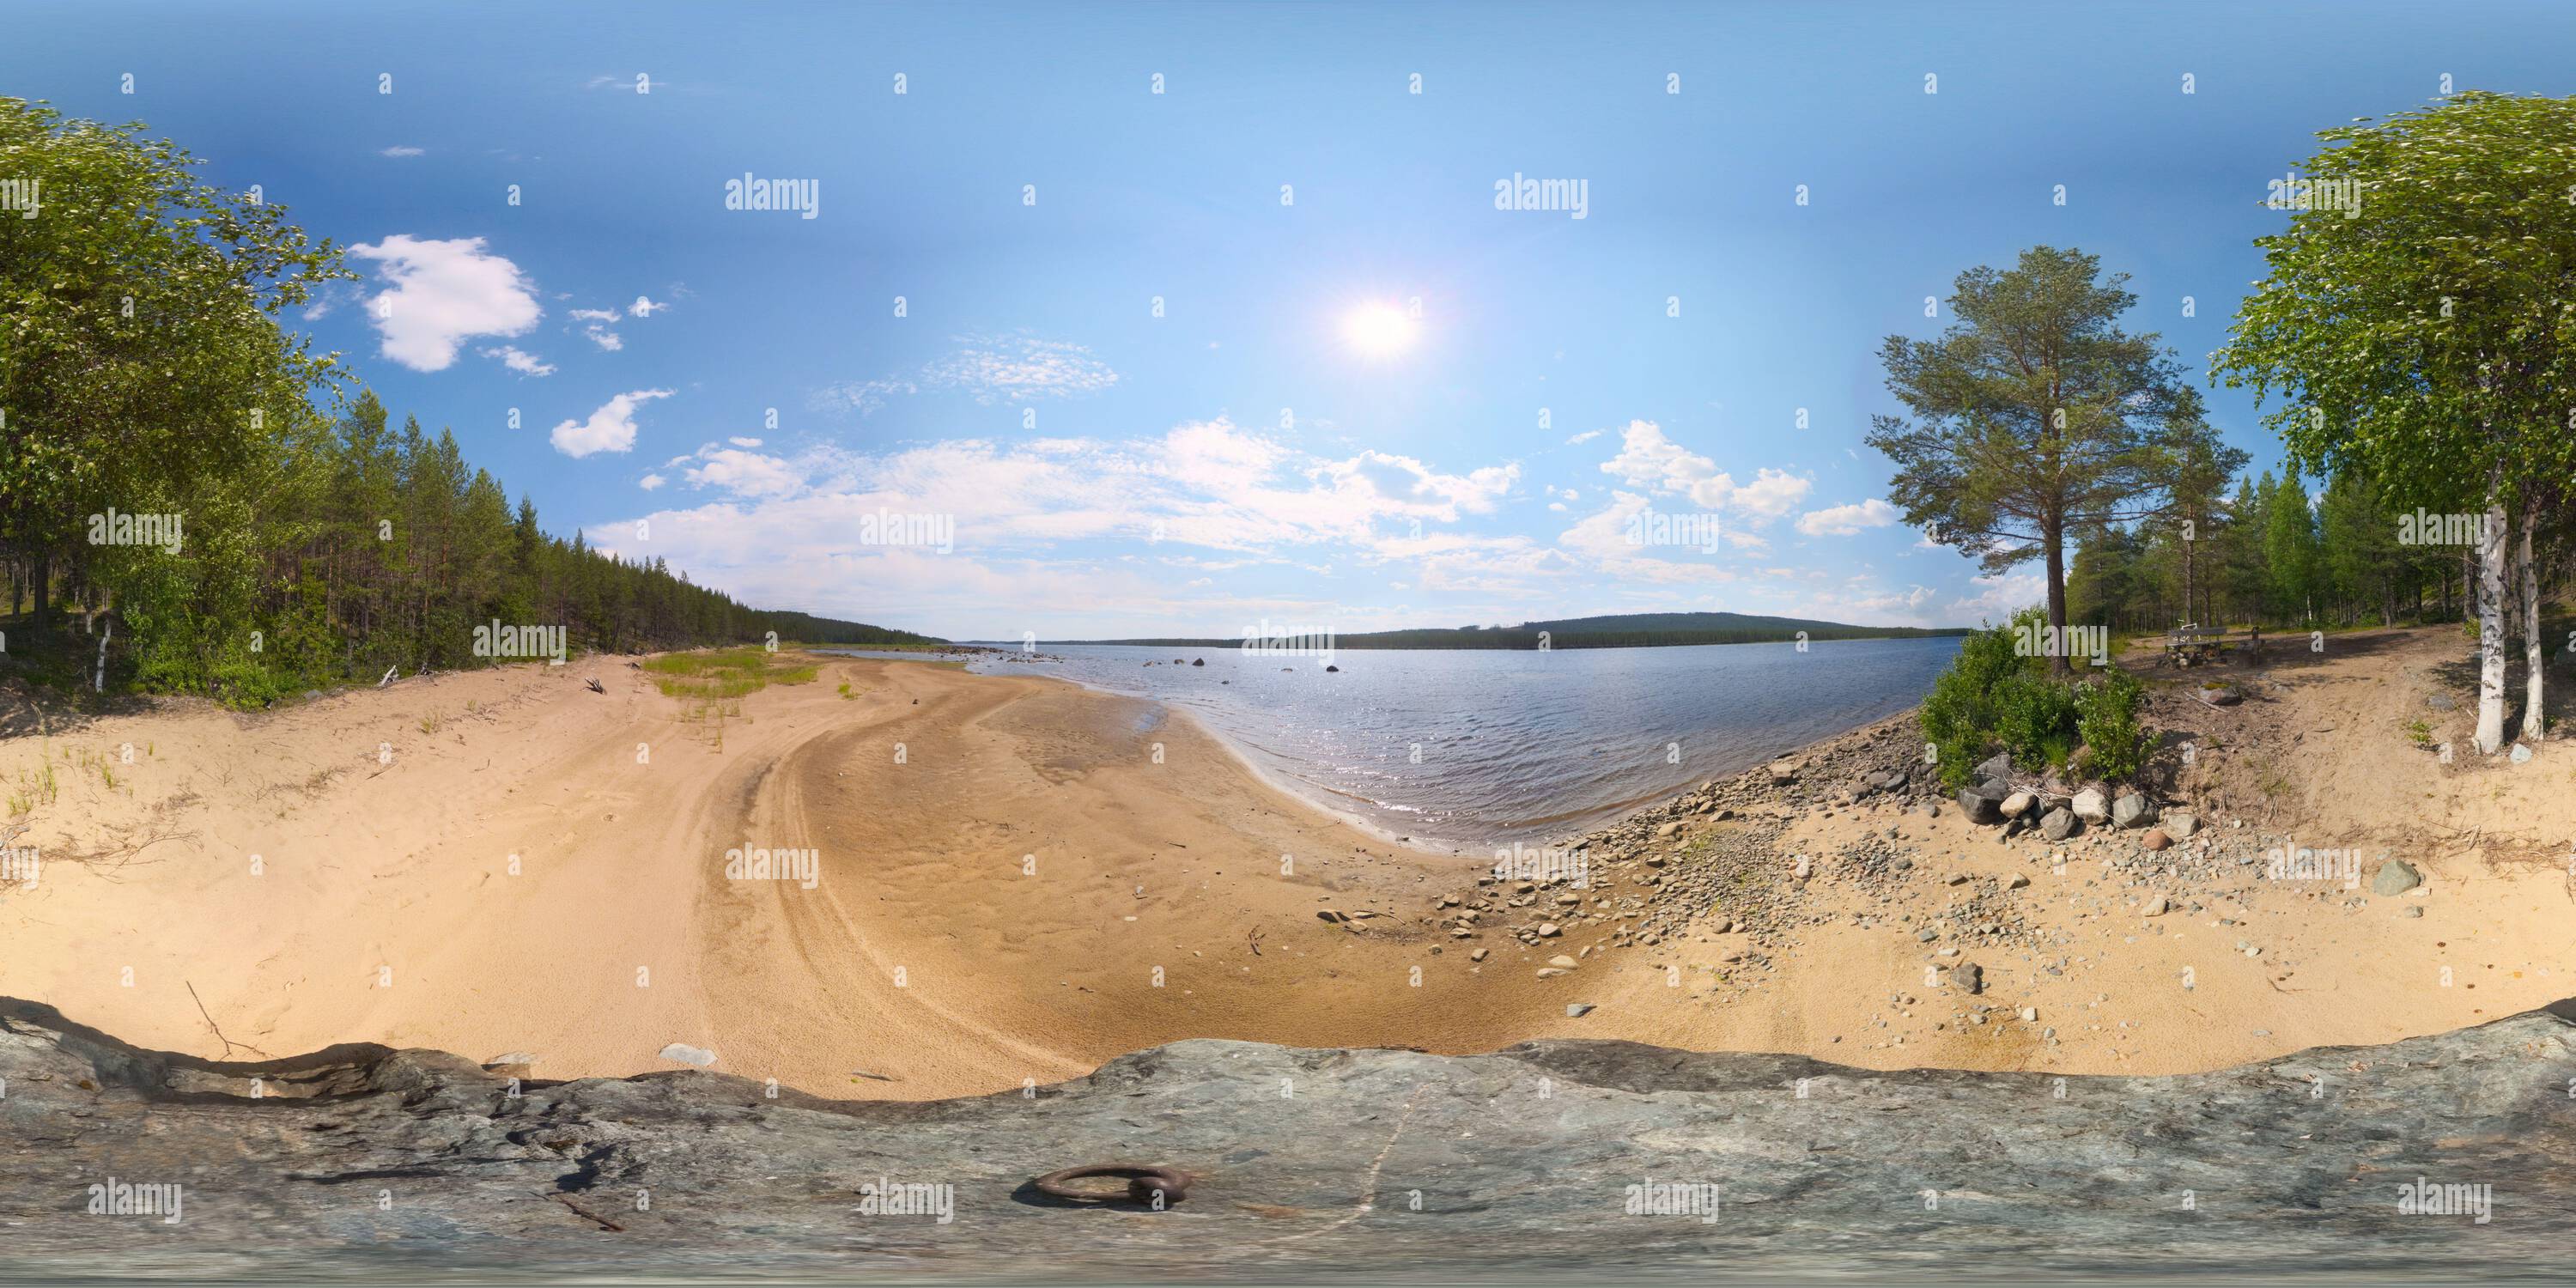 360 degree panoramic view of Spherical panorama of scenic natural beach at Skellefte river, Sweden (equirectangular, usable in common panorama viewers).